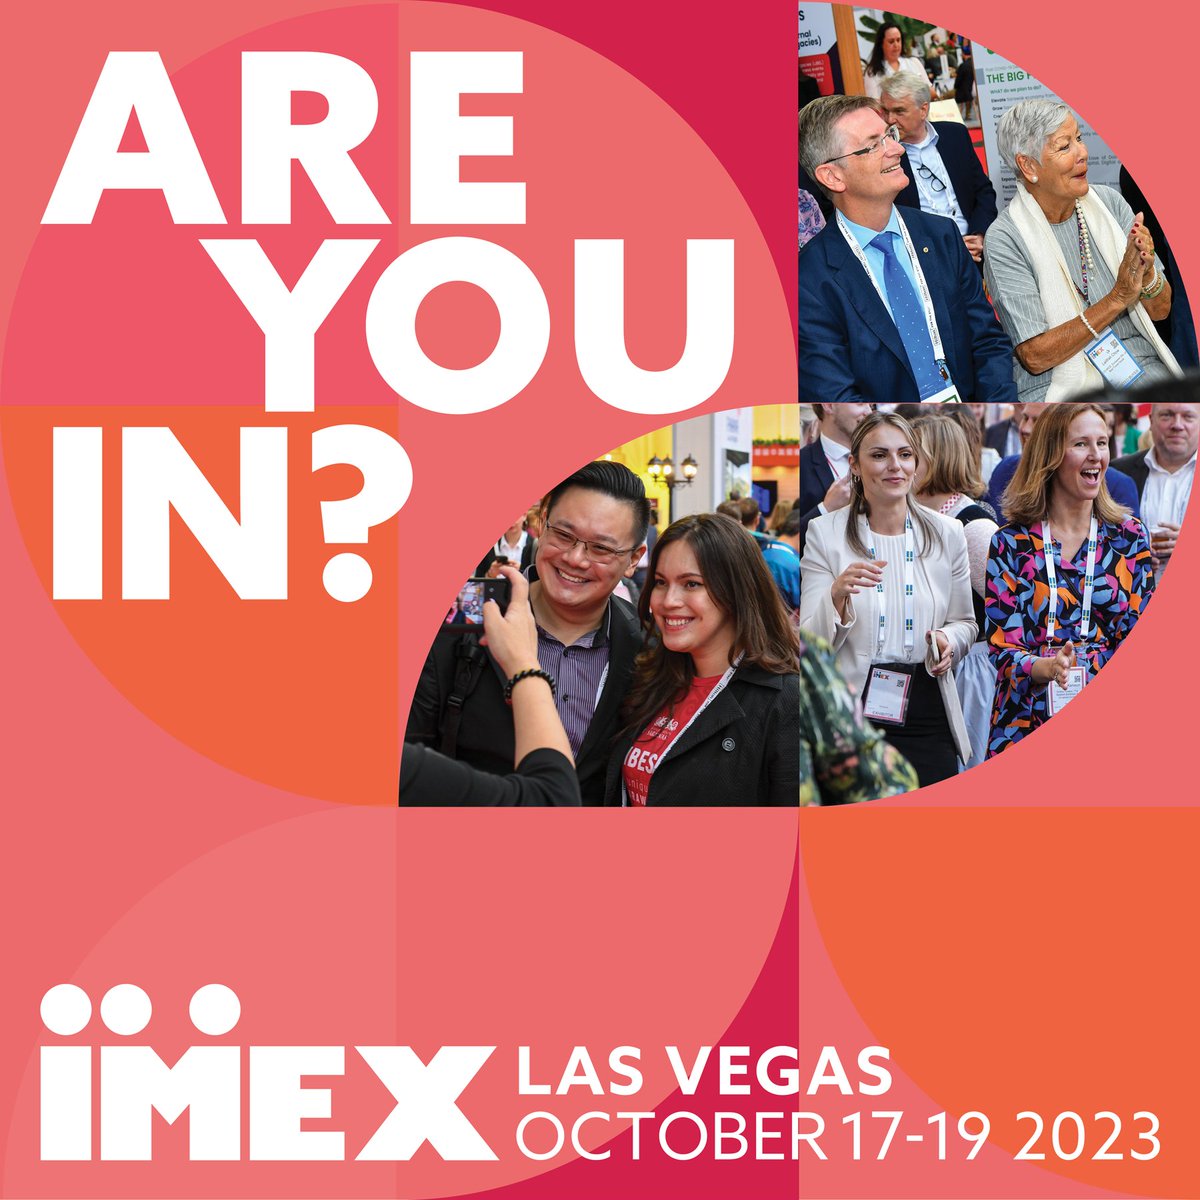 The largest trade show in the U.S. for the global meetings, events, & #IncentiveTravel, IMEX America kicks off a free 4-day program Oct 17-19 in #LasVegas! Don't miss our very own President & @CBSRNews' Managing Director, @ElizabethShirt, as she participates in 3 exciting